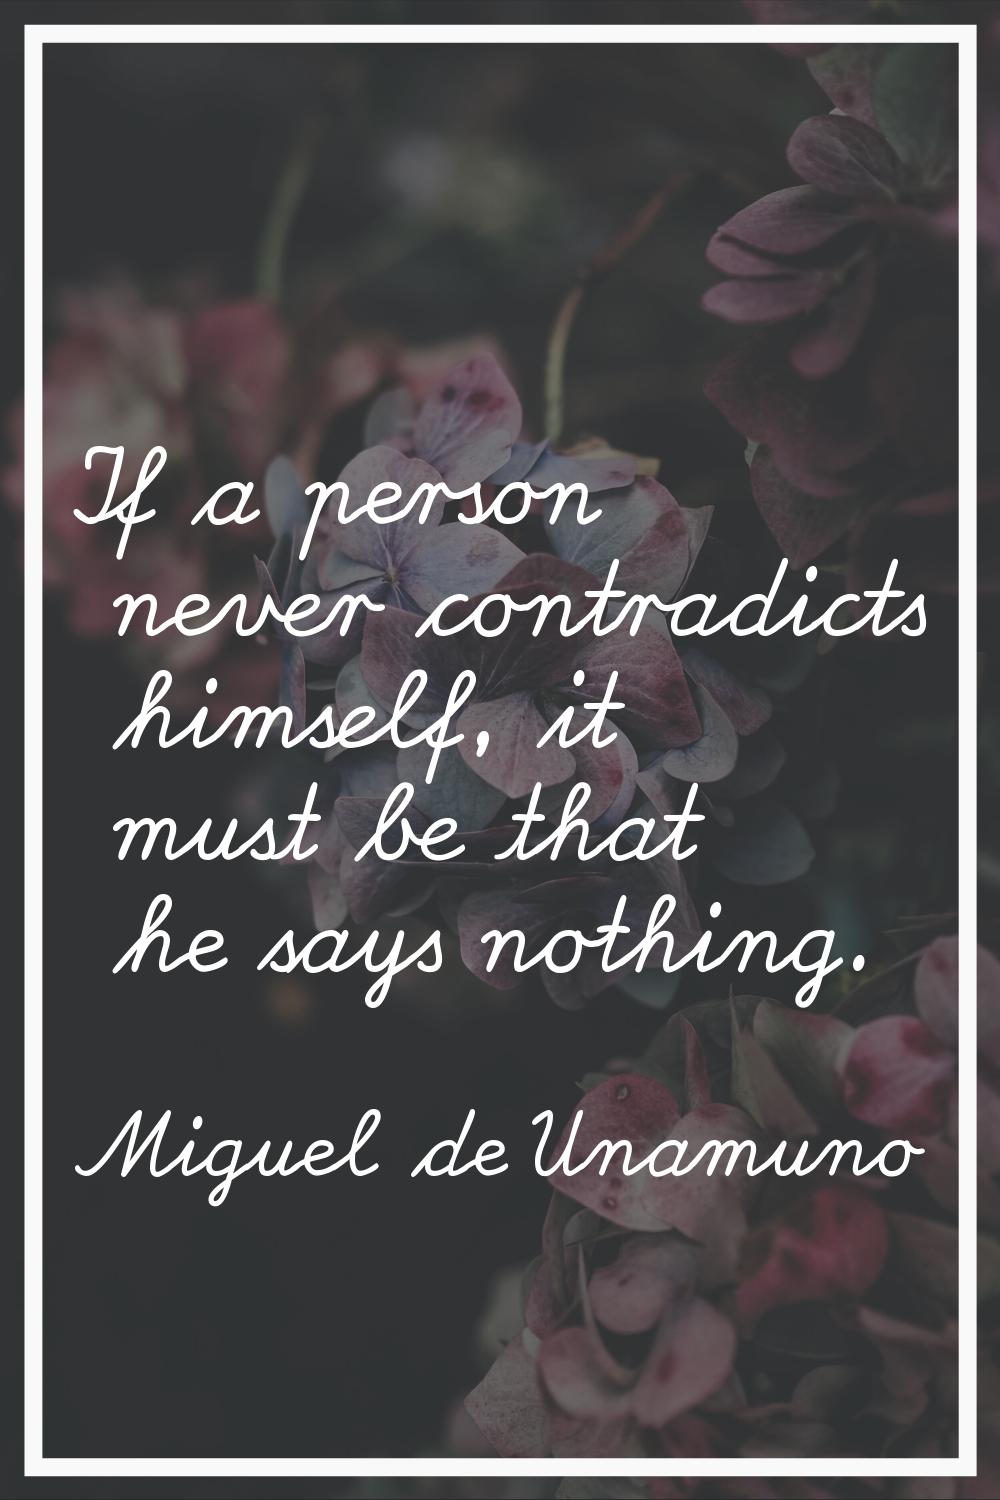 If a person never contradicts himself, it must be that he says nothing.